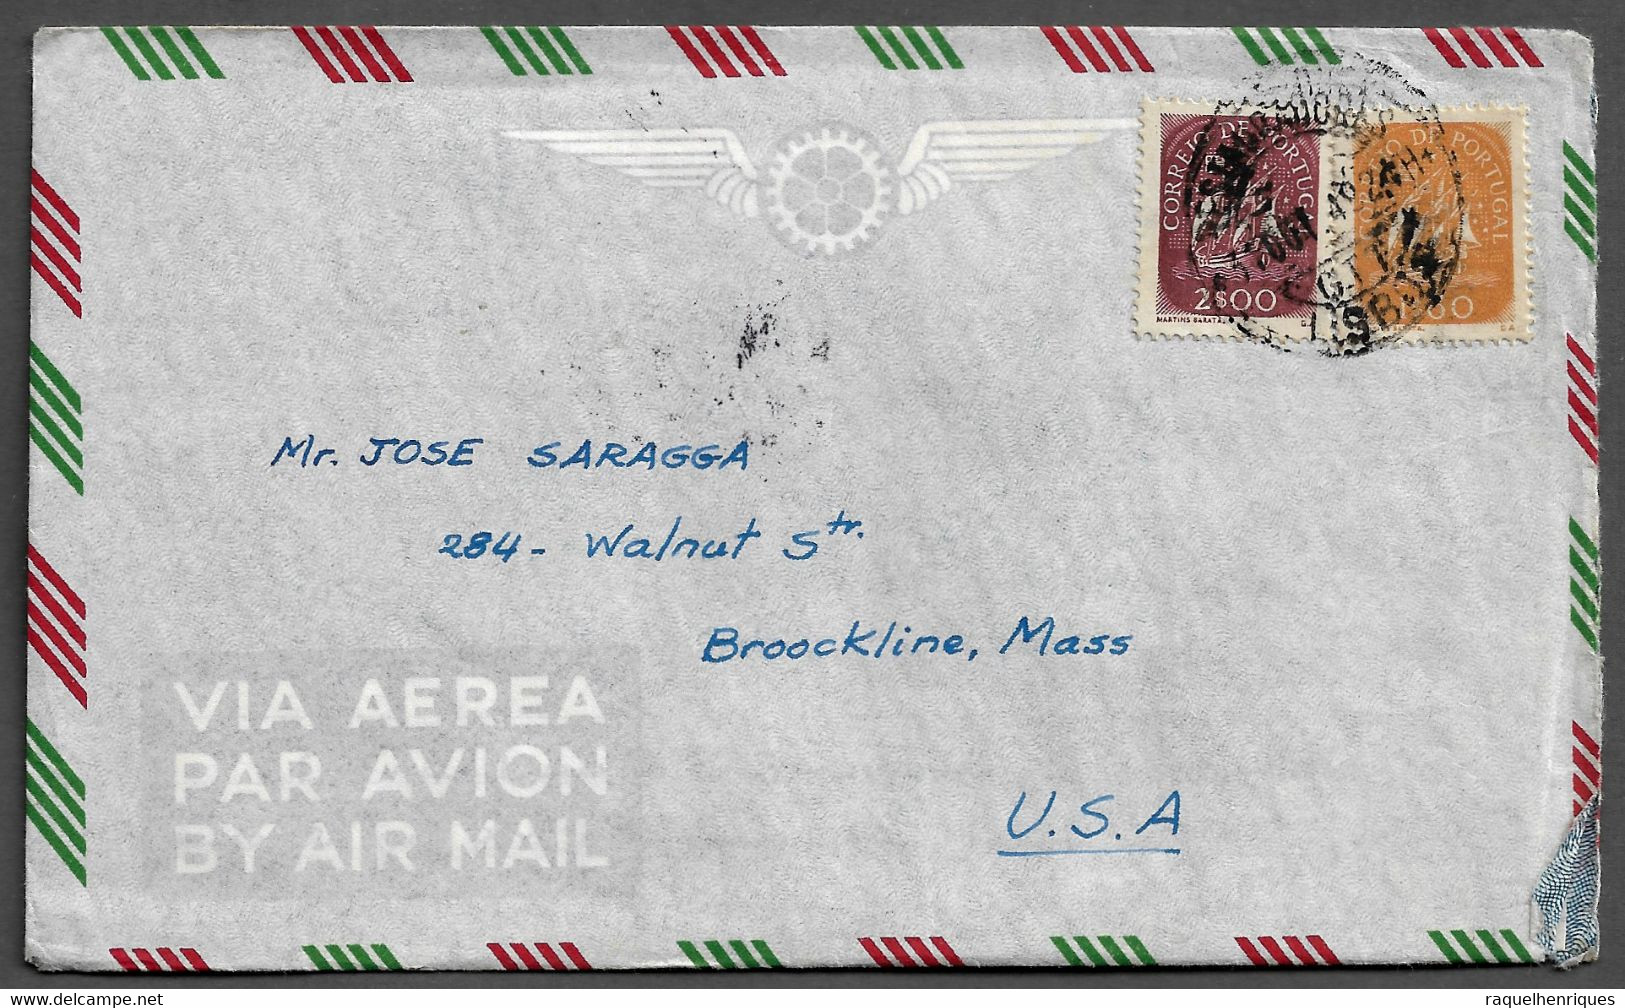 PORTUGAL AIRMAL COVER - 1949 FROM PORTUGAL TO UNITED STATES - CARIMBO LISBOA (PLB#03-08) - Lettres & Documents